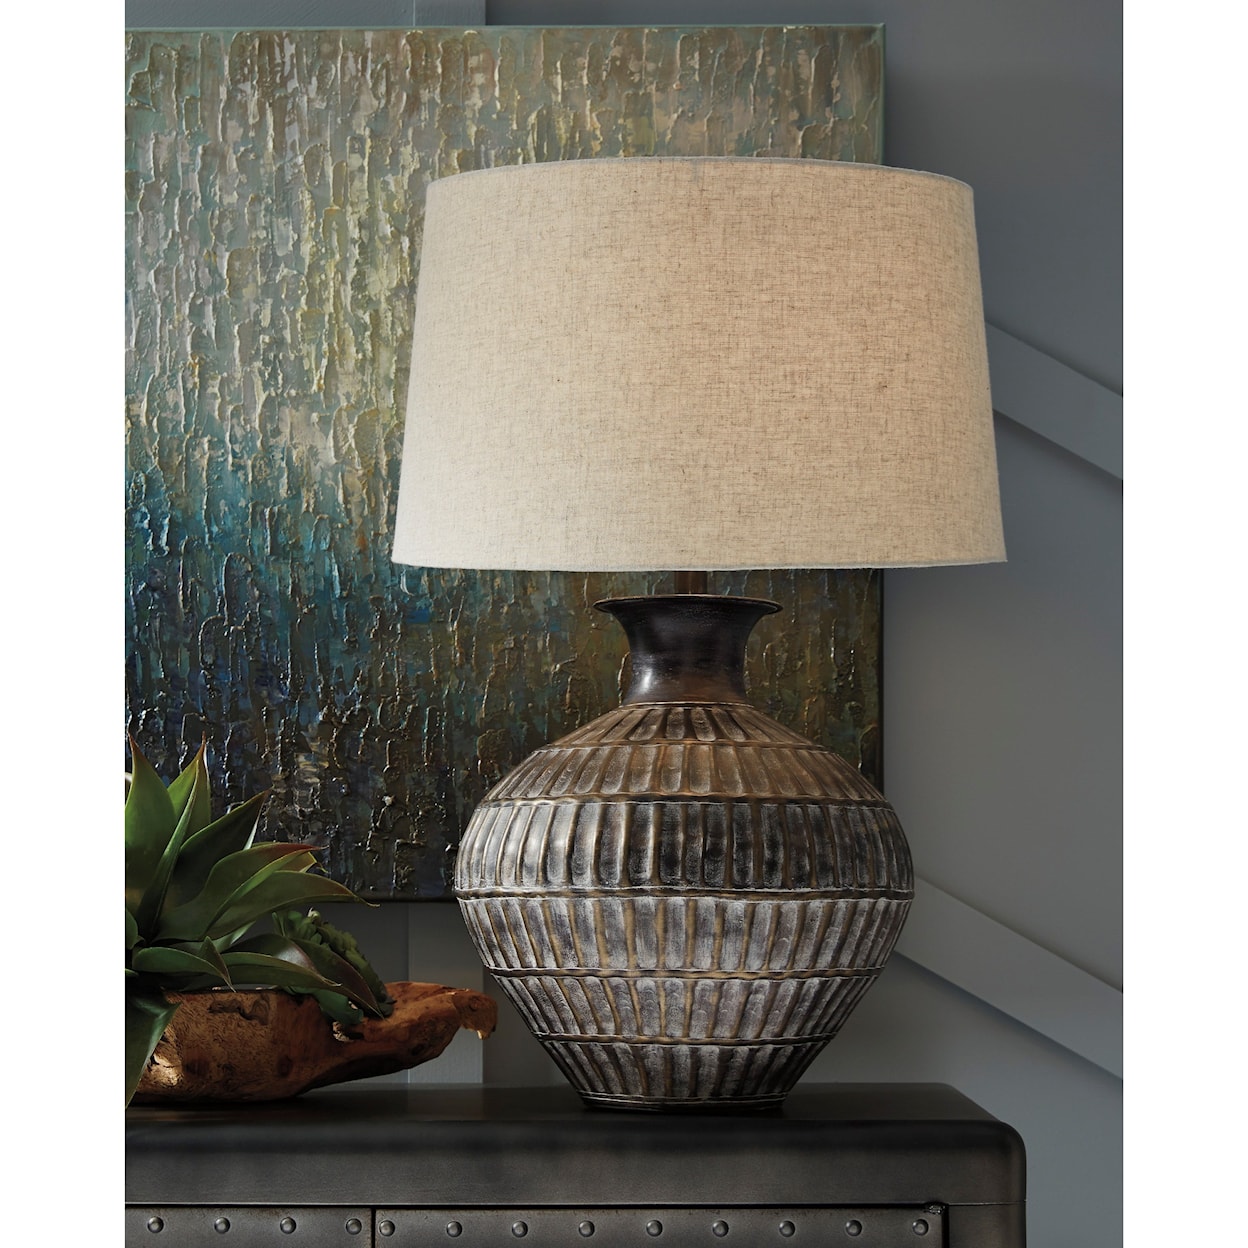 Signature Design by Ashley Lamps - Casual Magan Antique Bronze Finish Metal Table Lamp